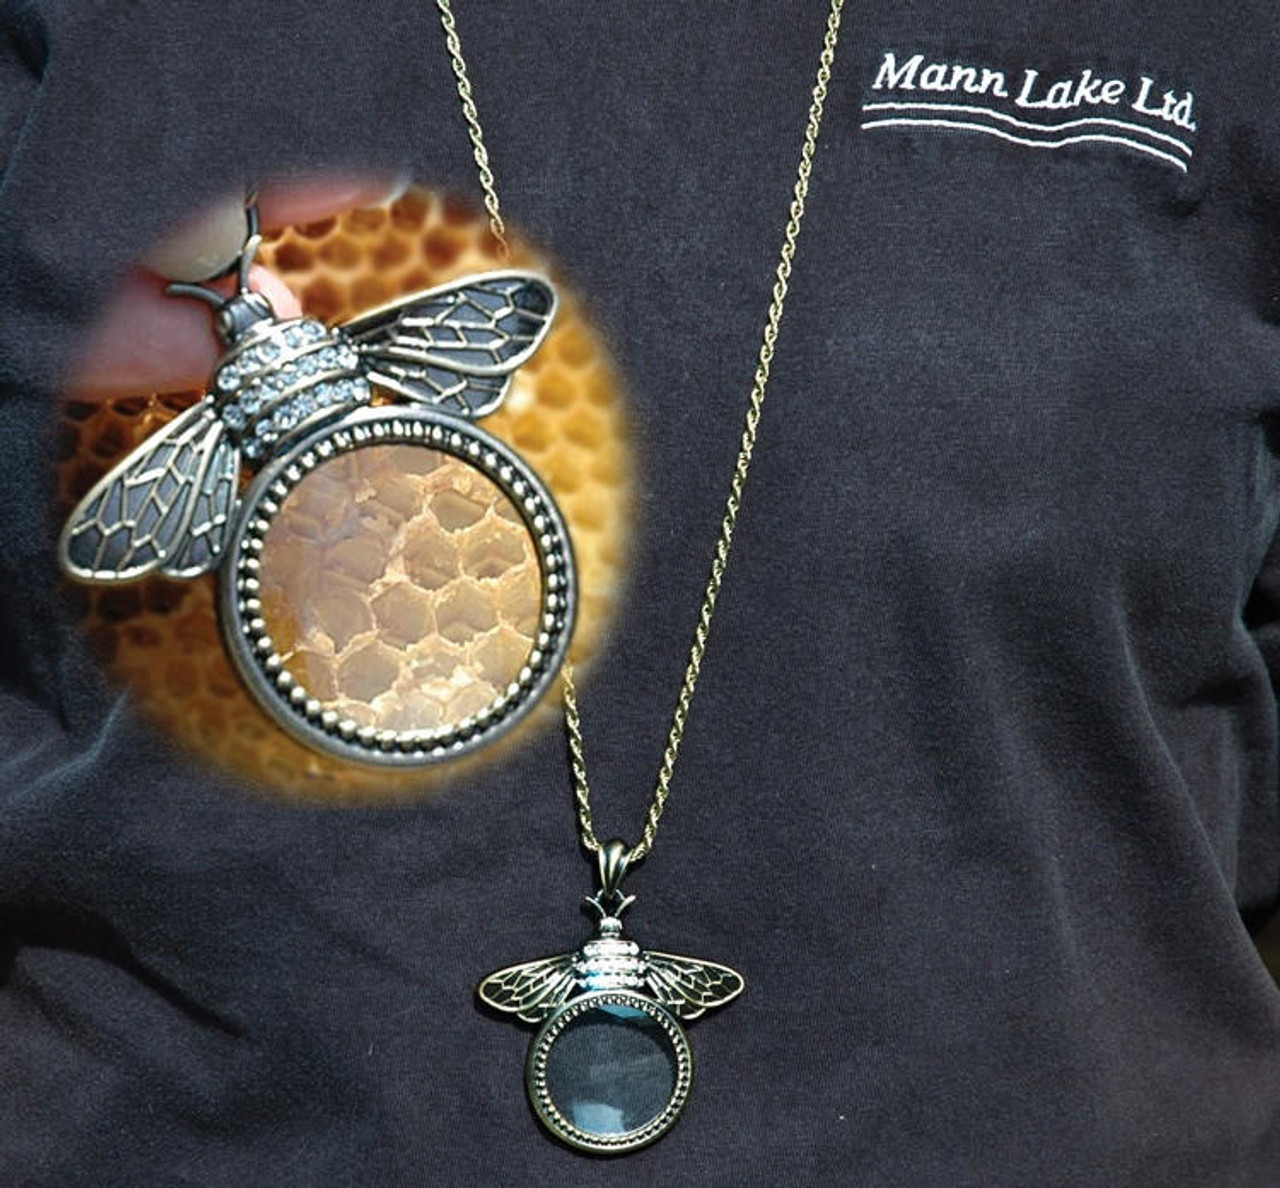 Bee Magnifying Glass Necklace by Mann Lake